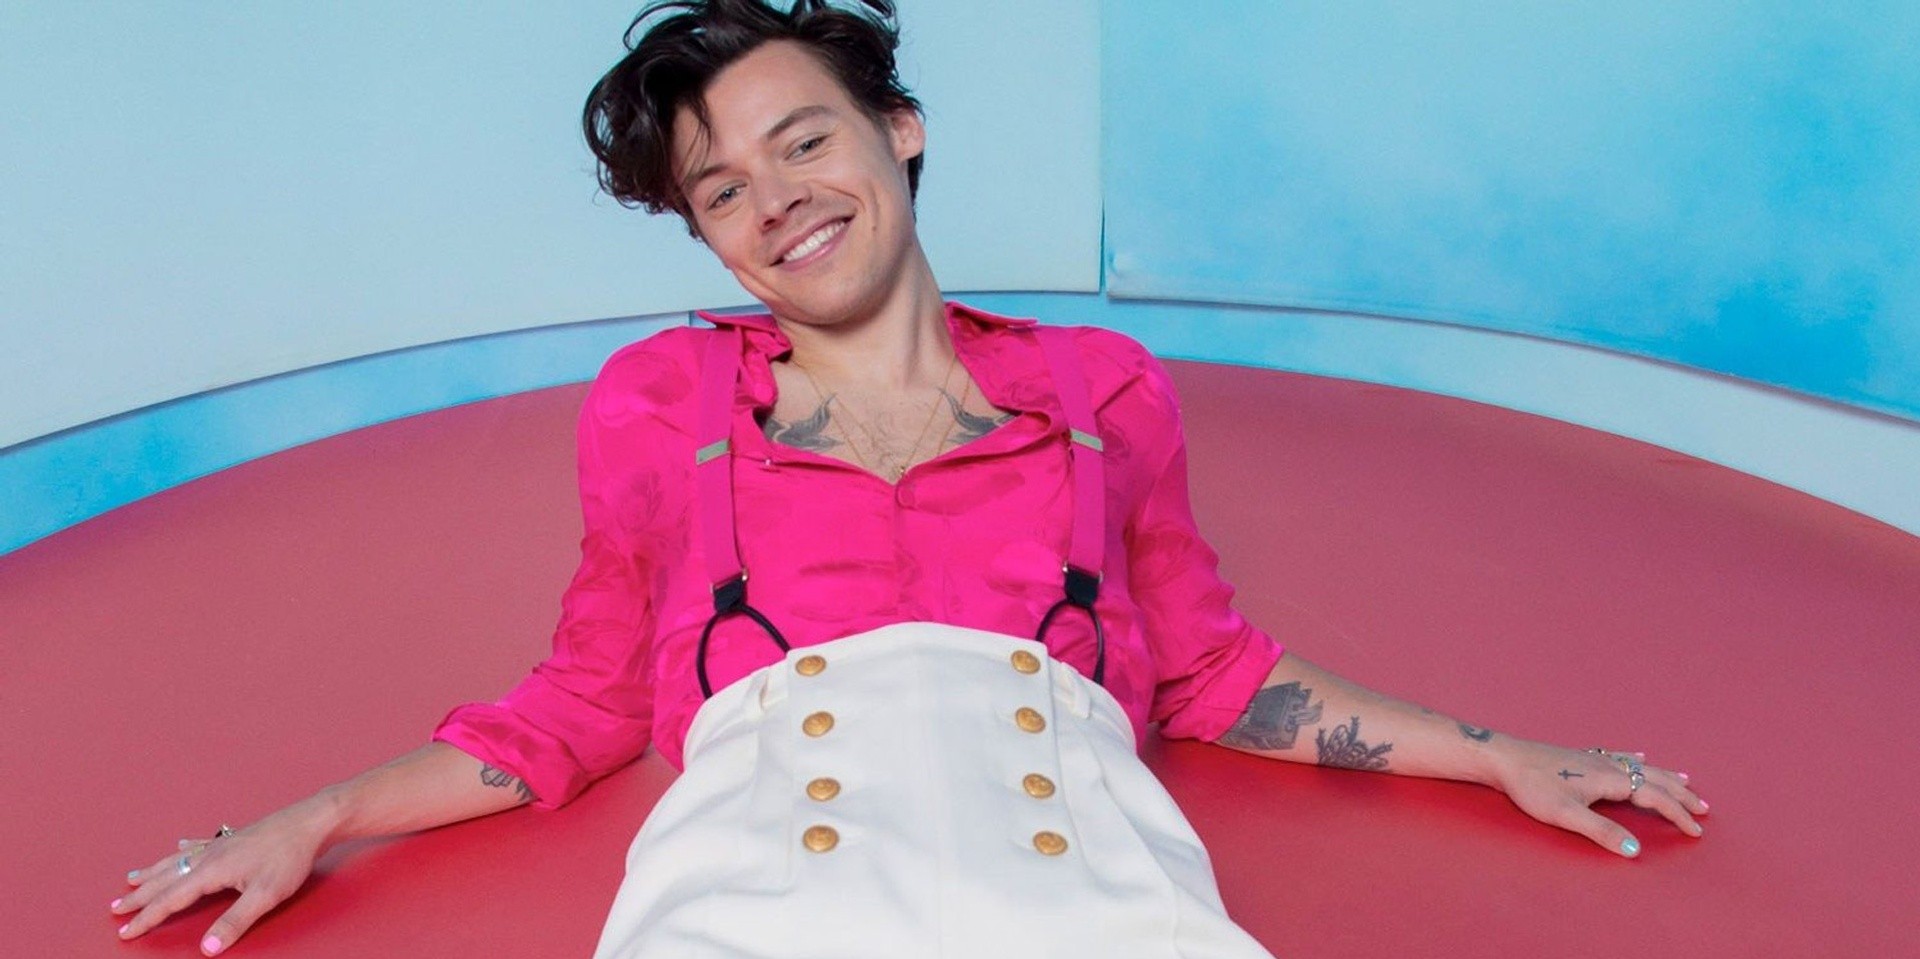 Harry Styles releases groovy new single 'Adore You' – listen